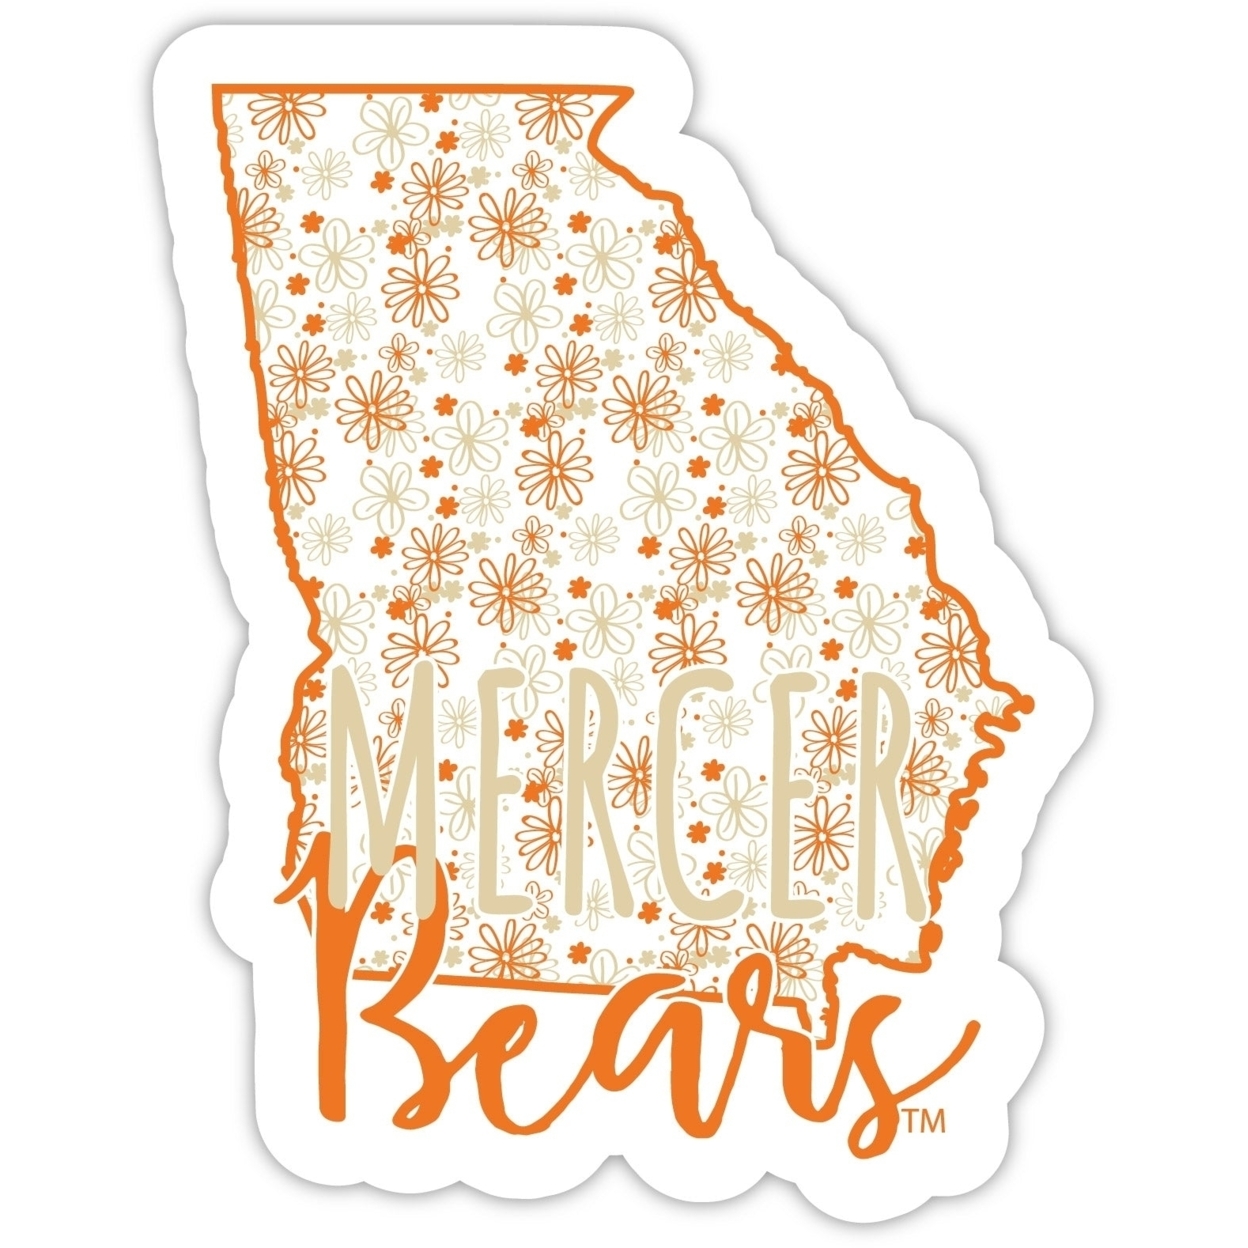 Mercer University Floral State Die Cut Decal 2-Inch